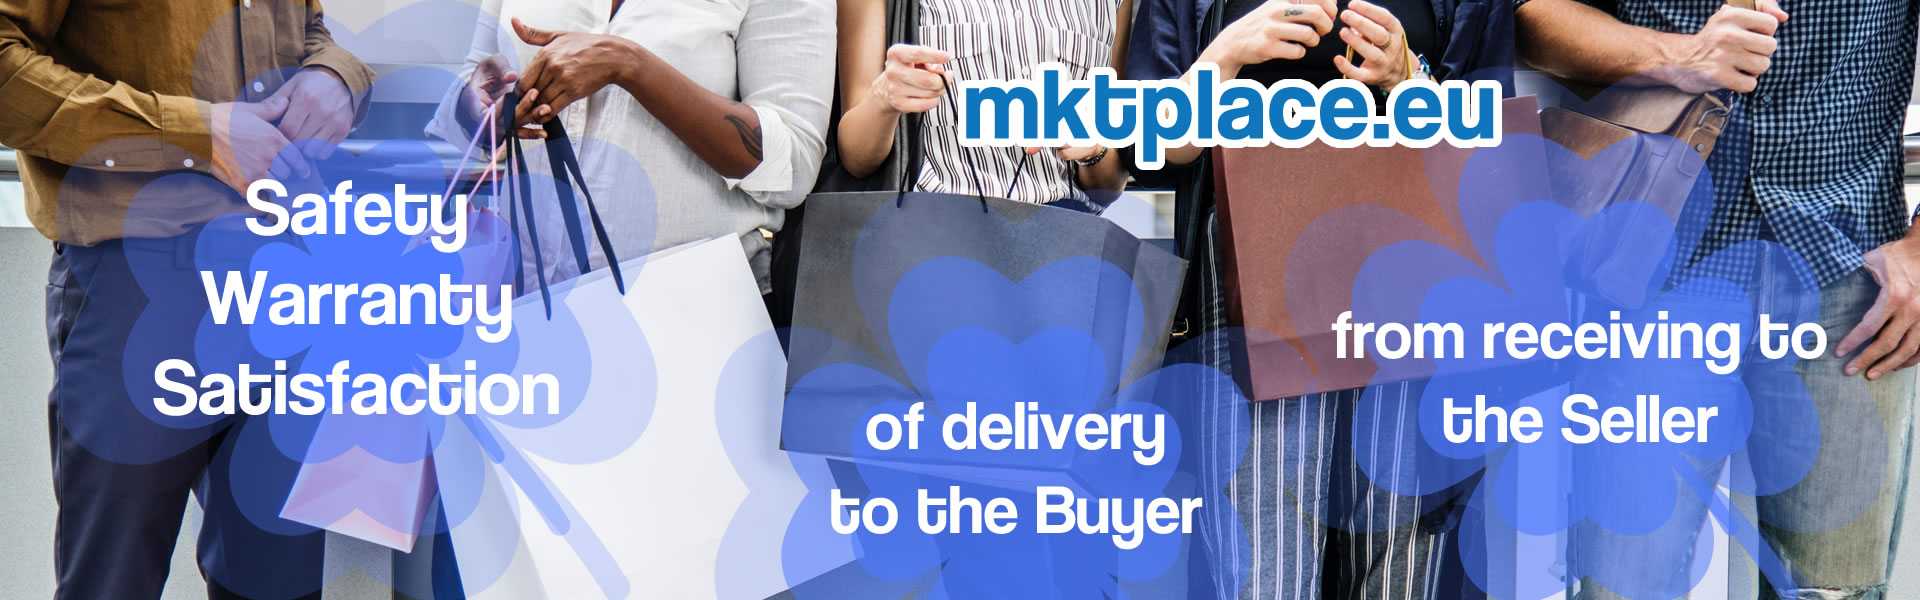 mktplace - Security, Satisfaction and Guarantee for the Buyer an